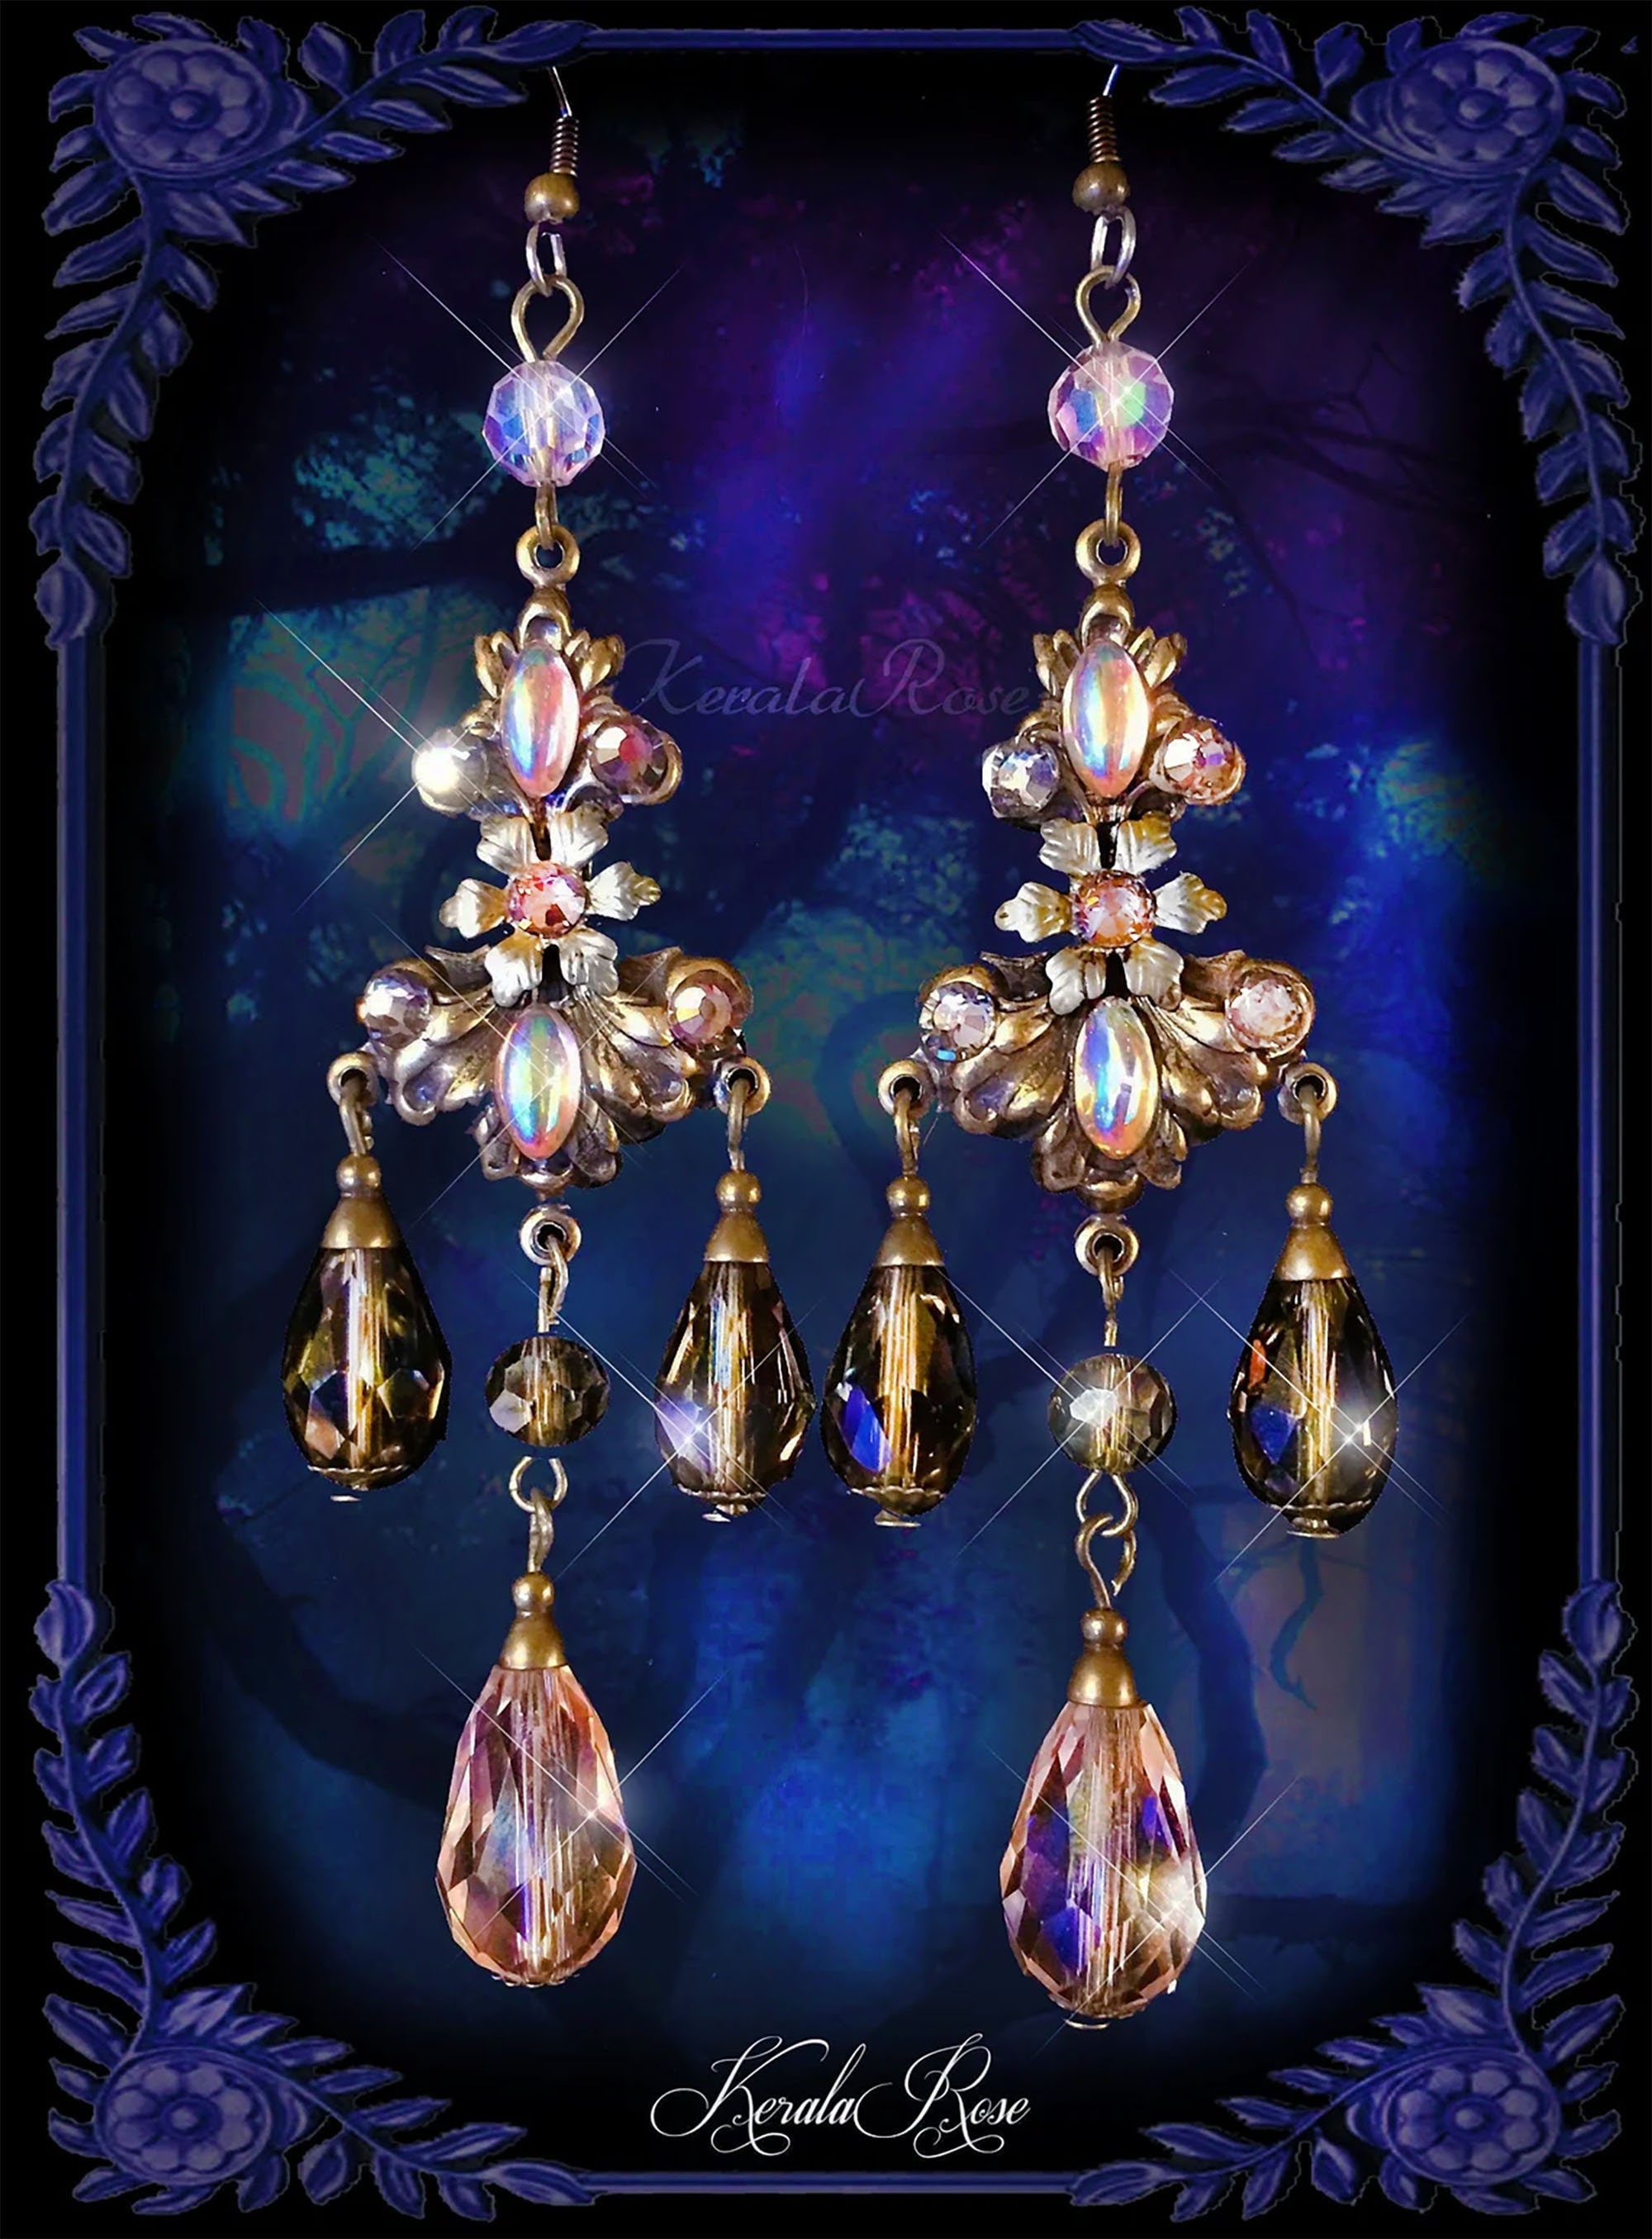 Antique Brass Crystal Filigree Gypsy Chandelier Earrings Blue Green Exotic Bohemian Purple Pearl White Color Options! Neo- Victorian